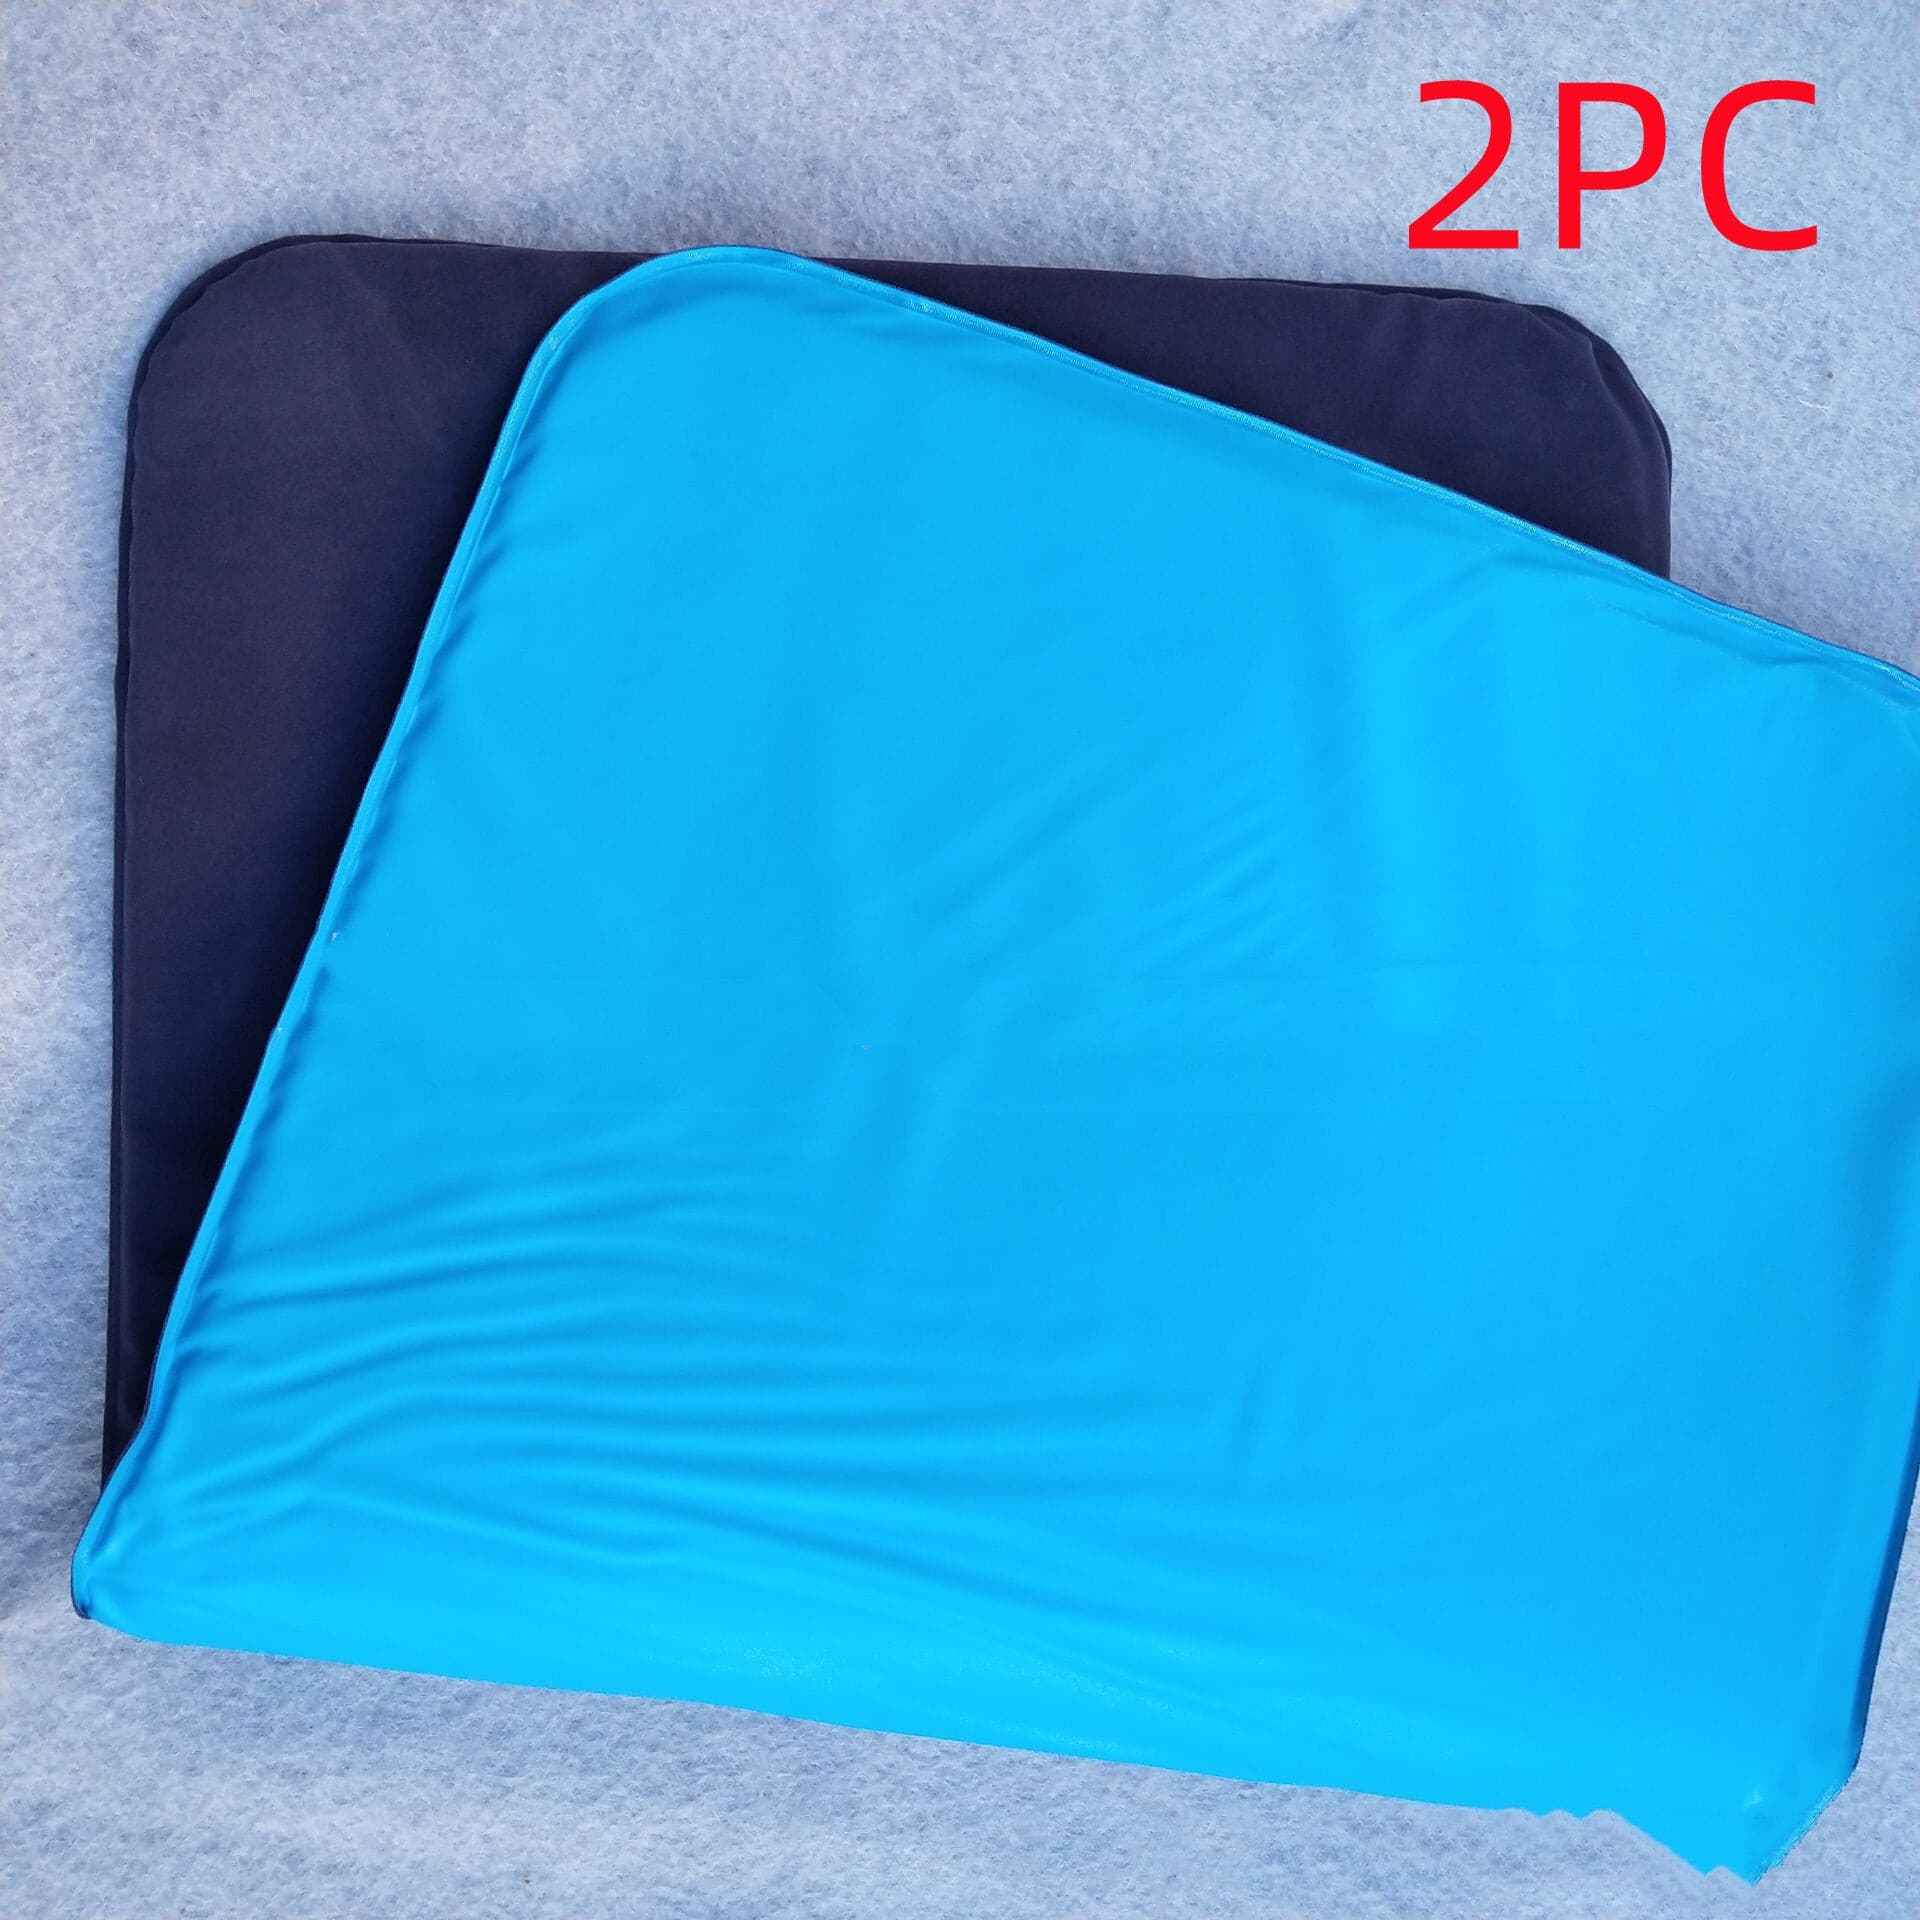 Chillmax - Personal Cooling Pillow.